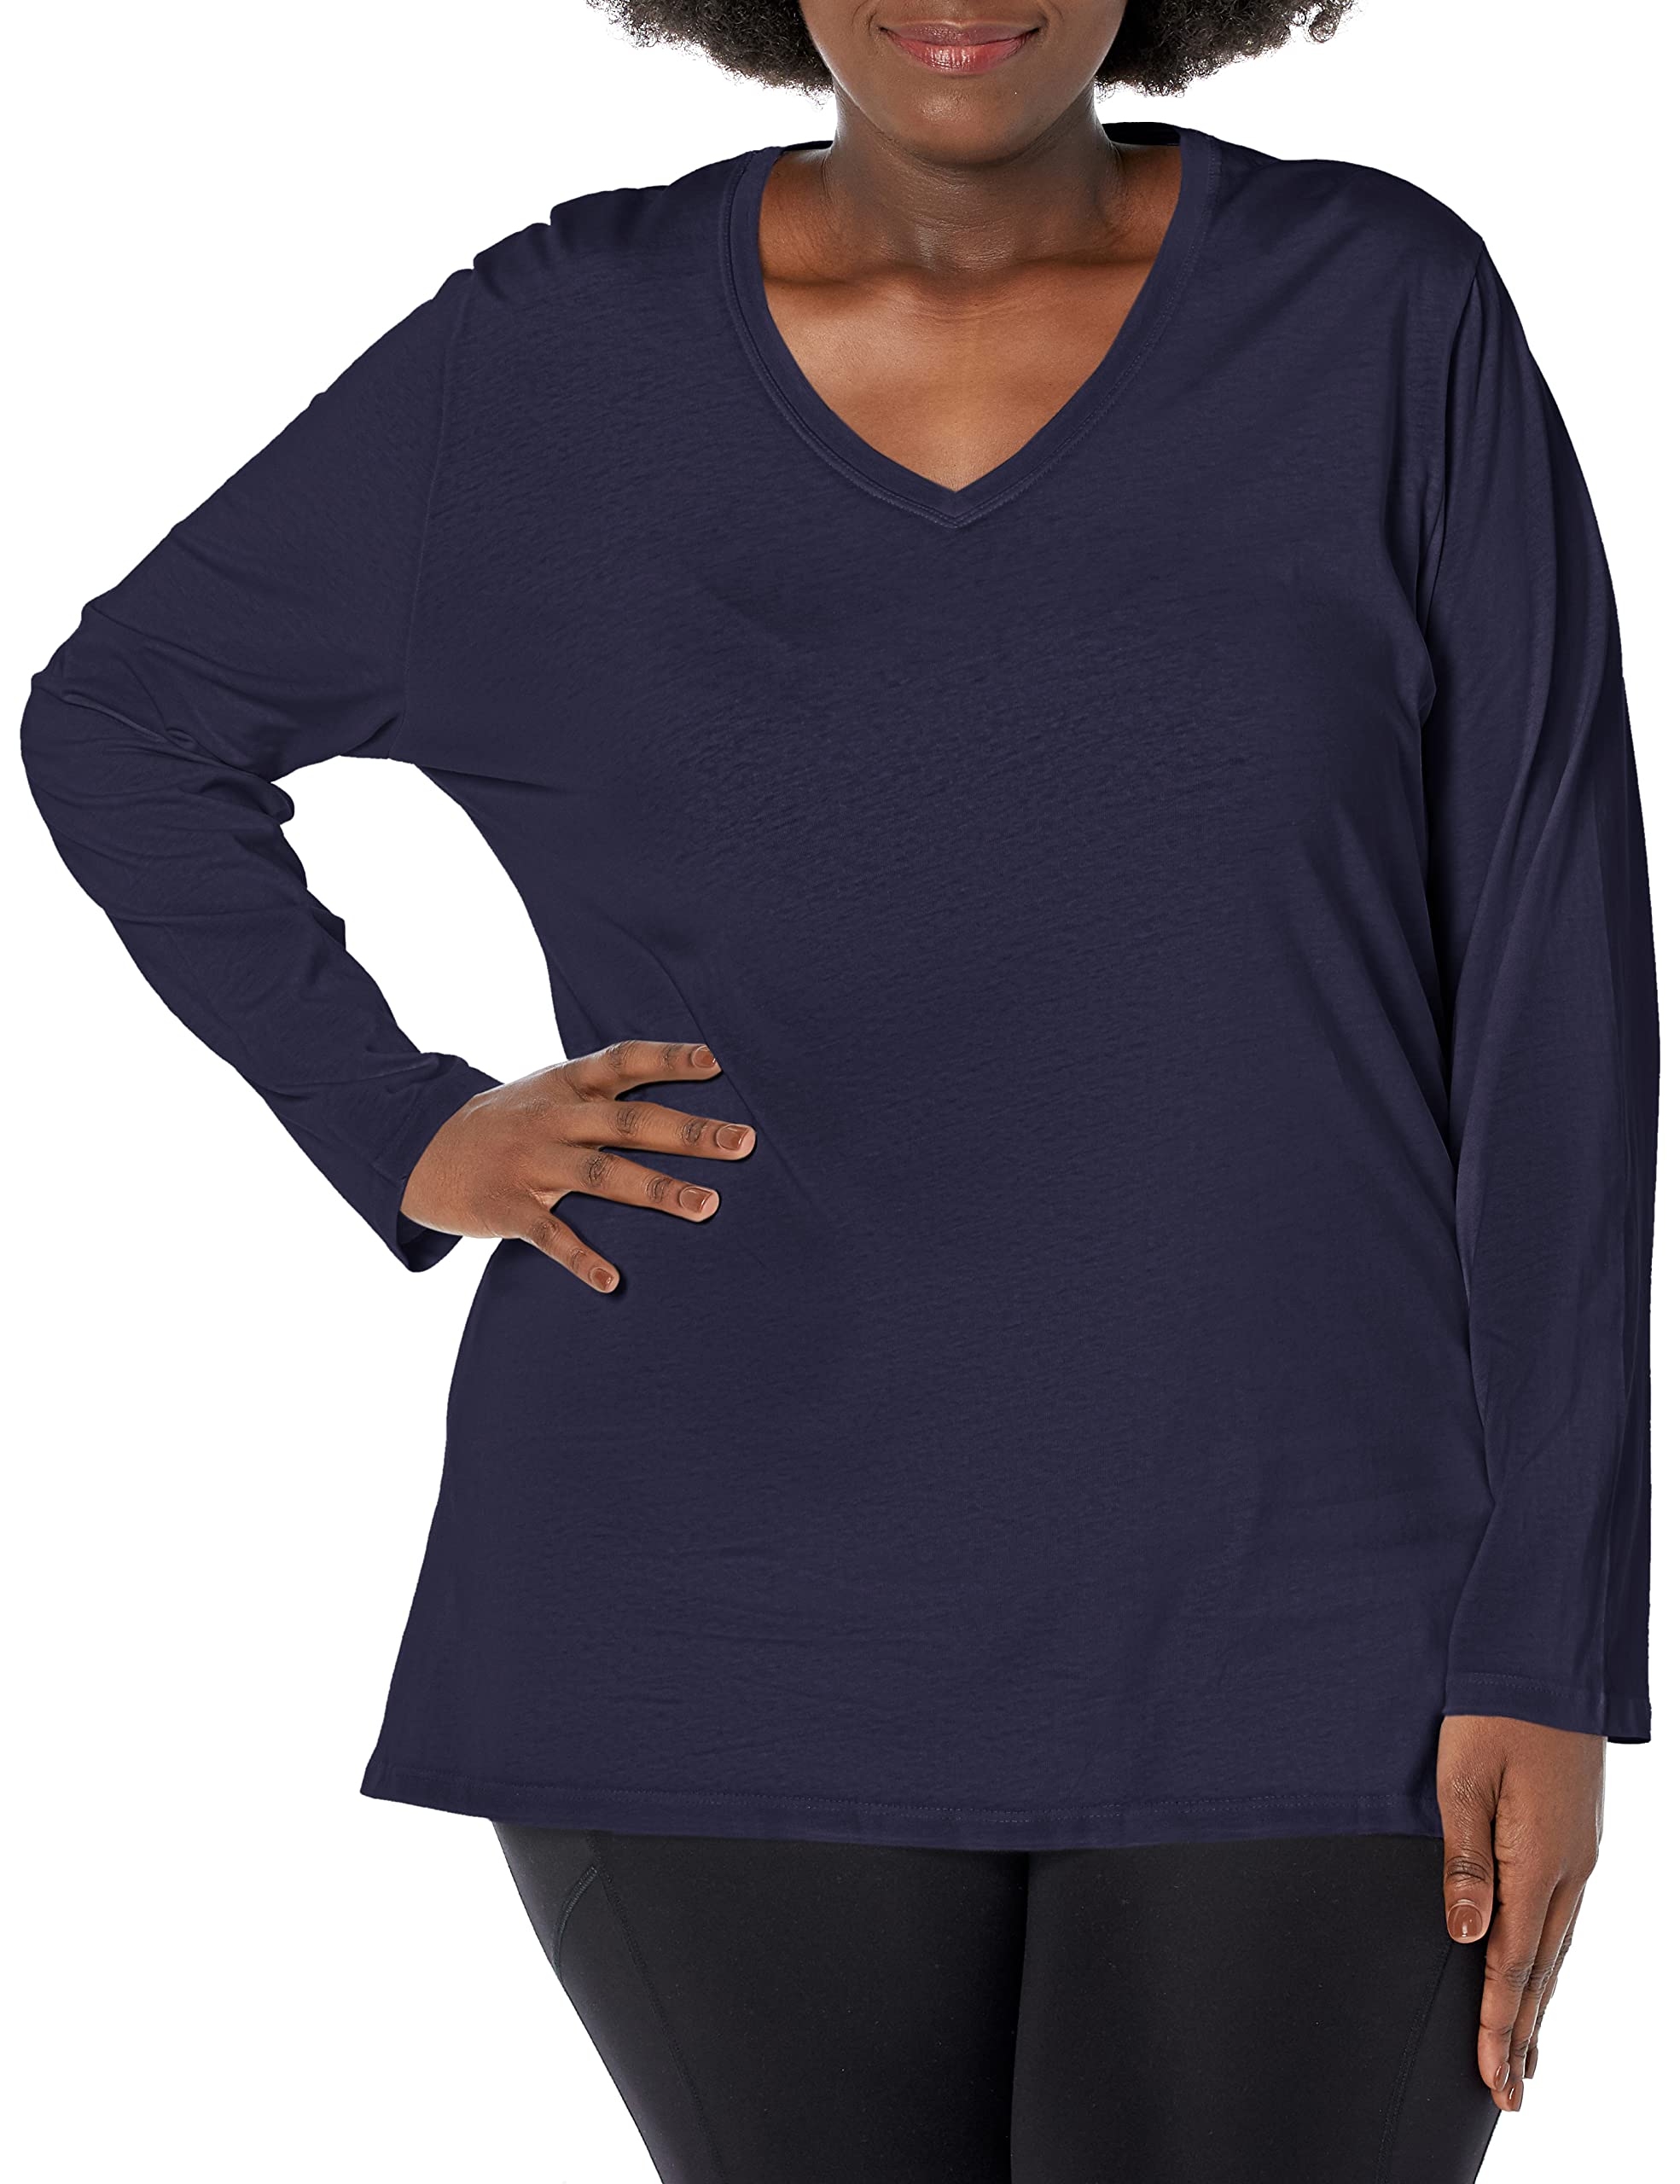 JUST MY SIZE Women's Plus Size Vneck Long Sleeve Tee